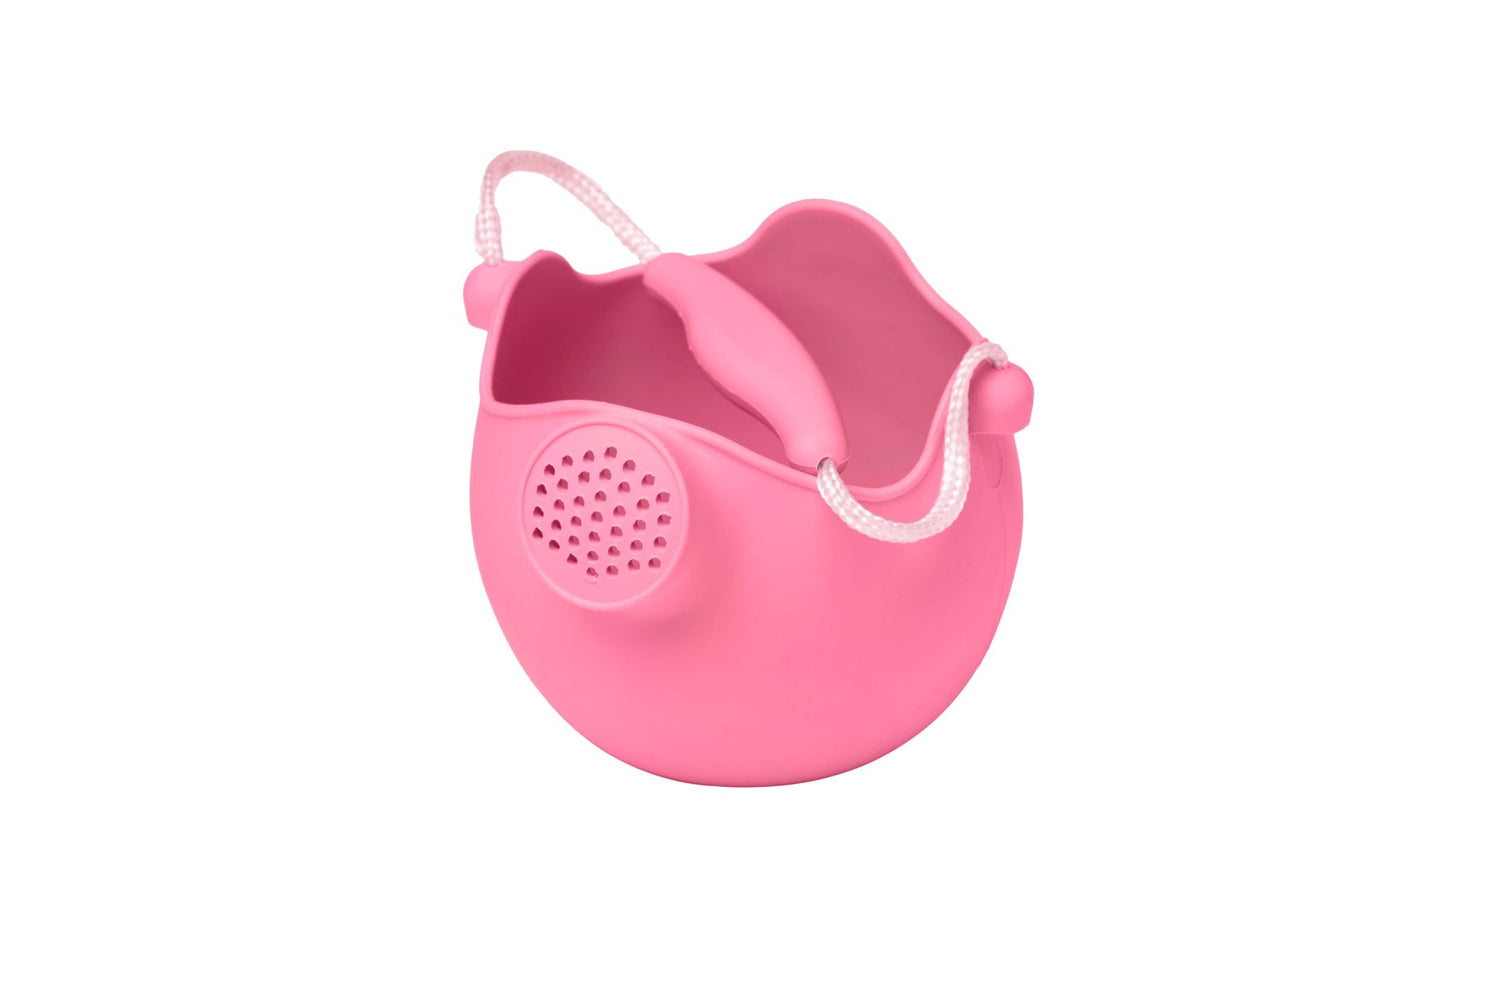 SCRUNCH WATERING CAN Petrol by SCRUNCH - The Playful Collective